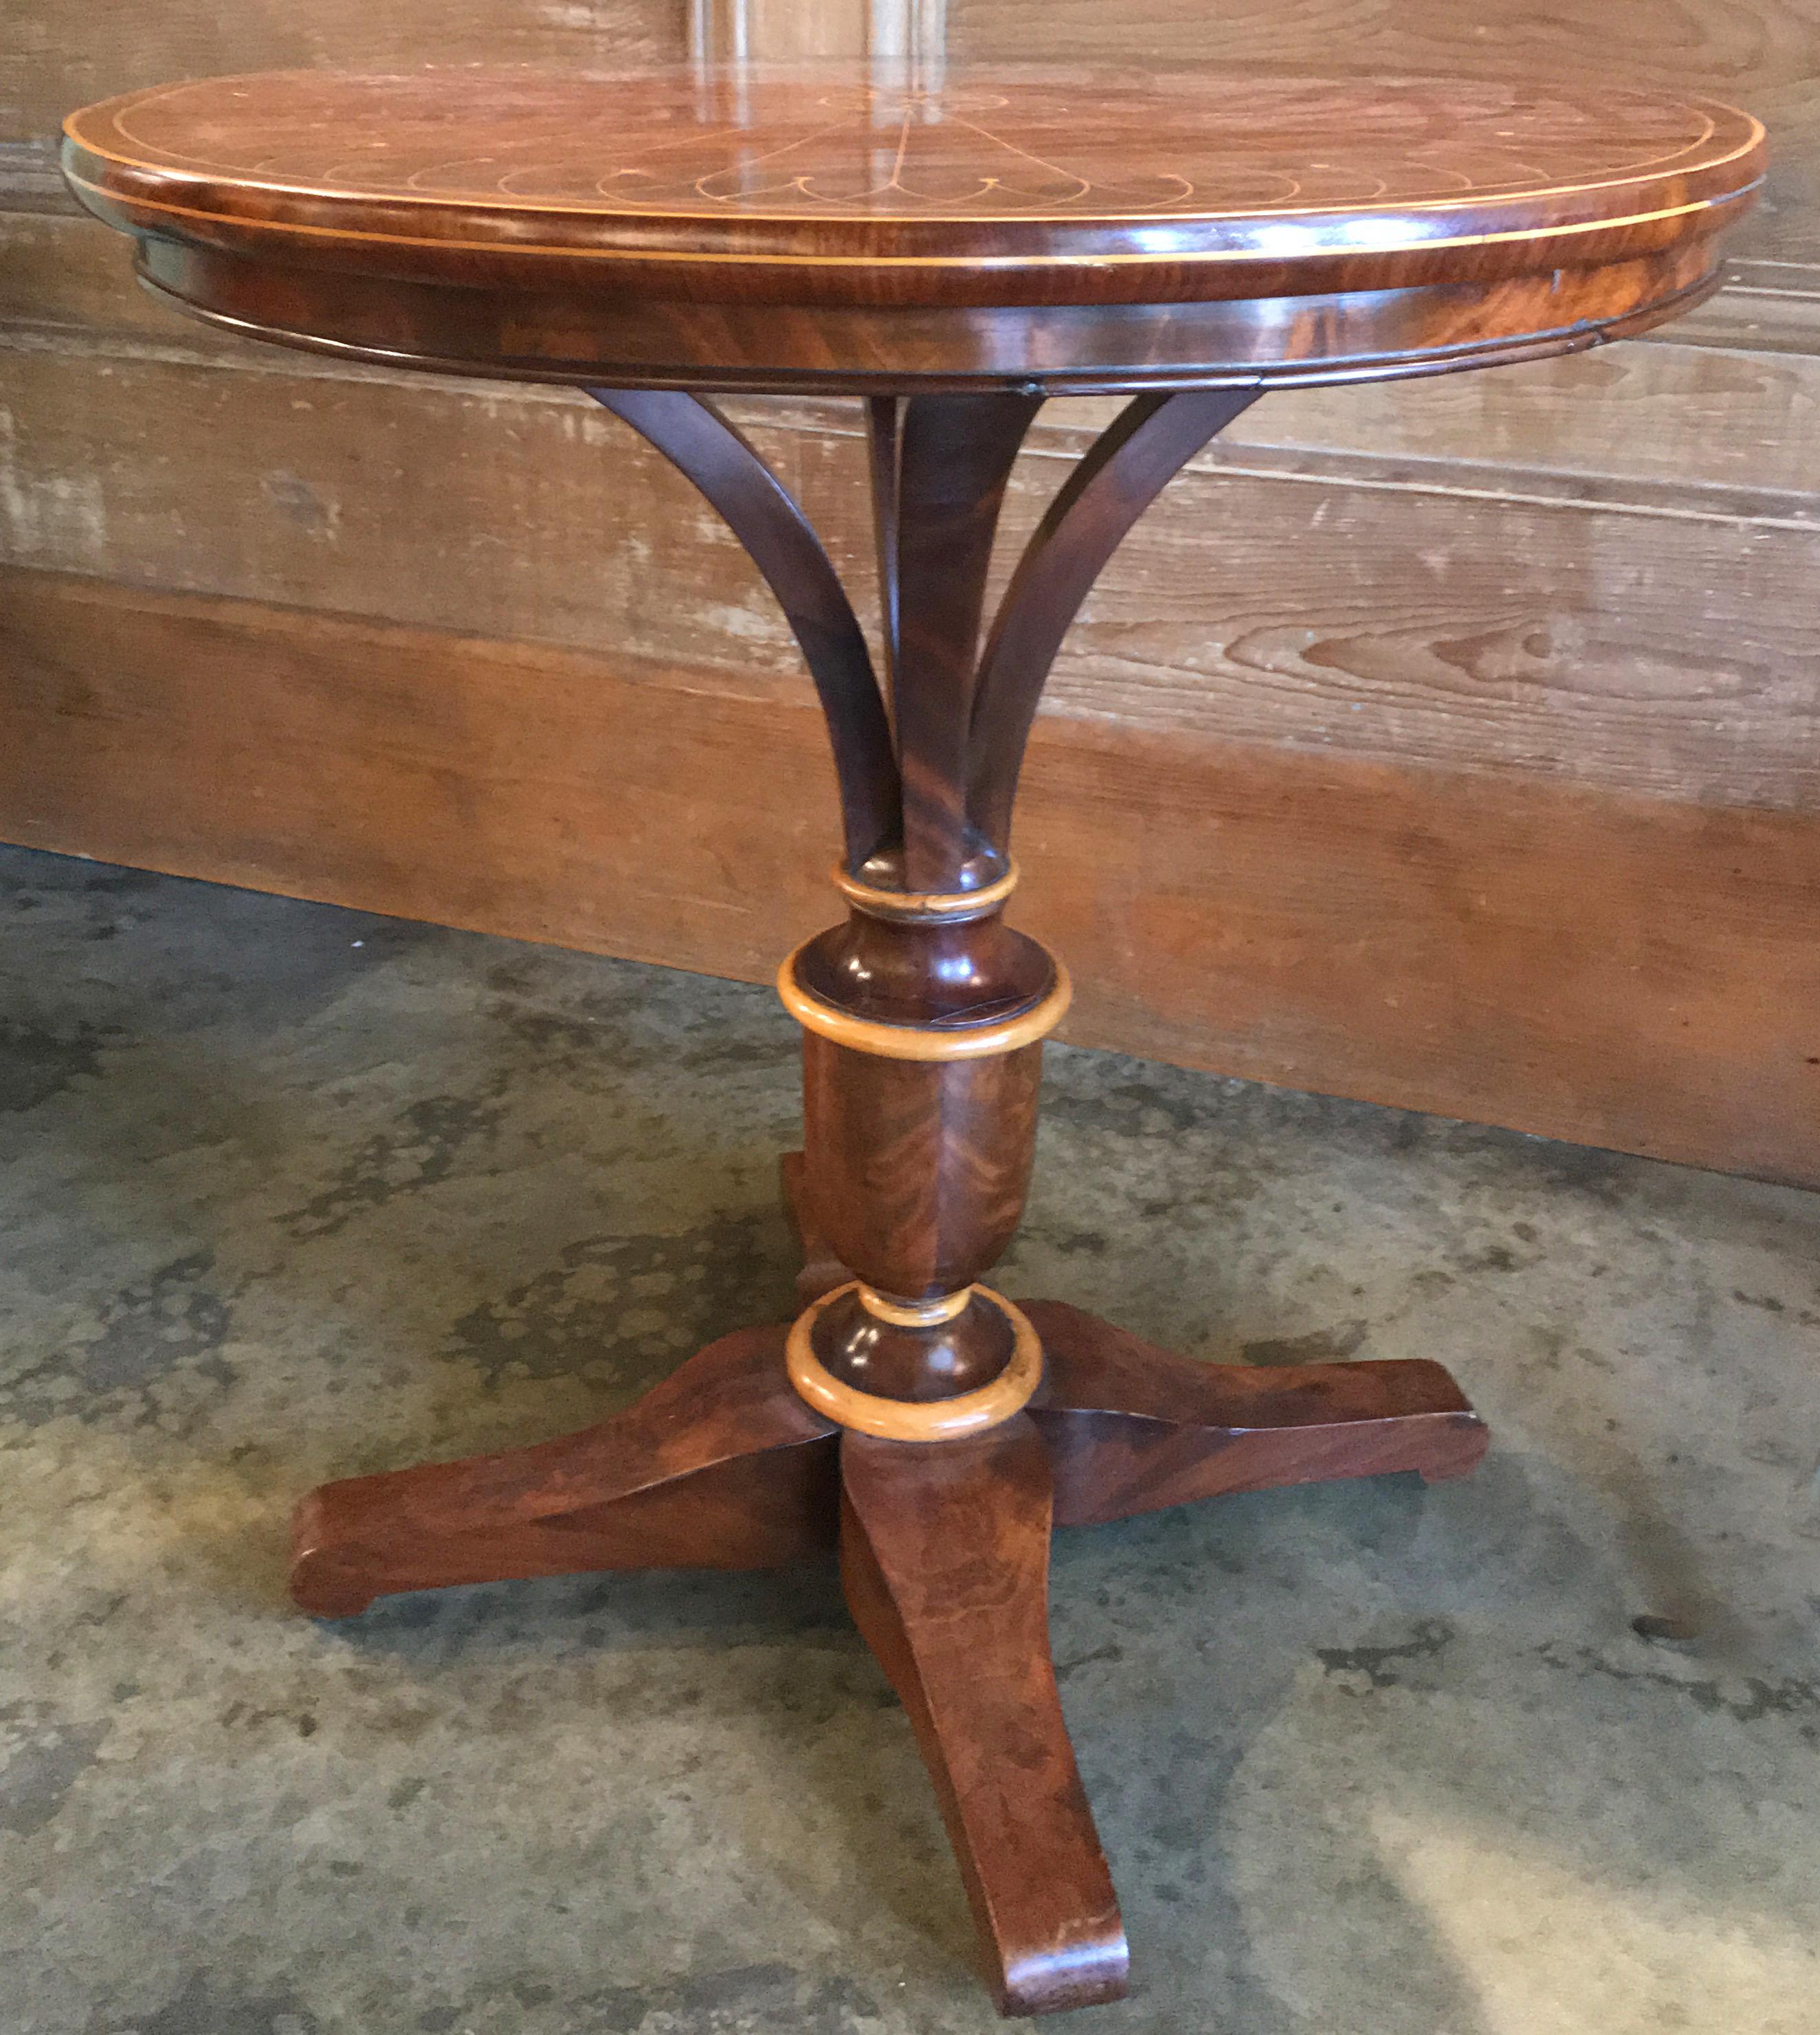 An exquisite Biedermeier round top mahogany center table with radiating line inlay, raised by an urn form pedestal with fruitwood highlights and four carved feet. Dates to the 19th century in very good condition, with repairs and restorations to the